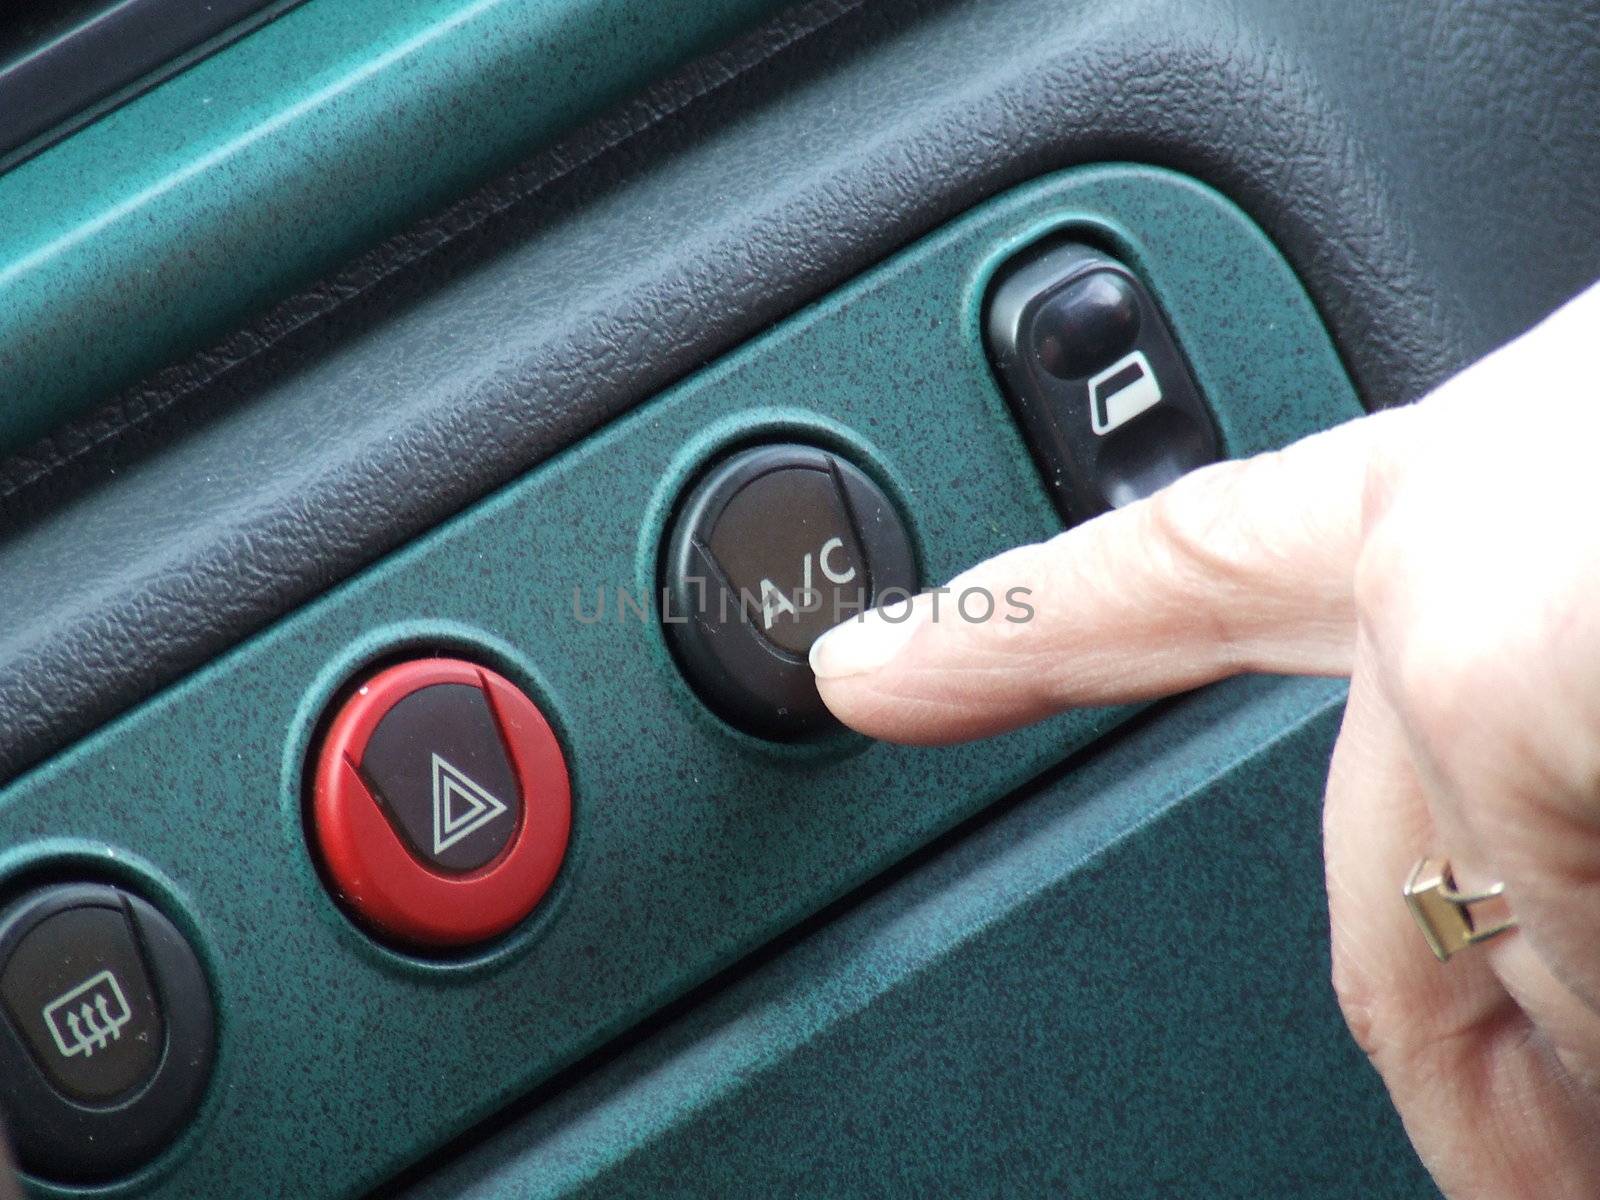 Pressing the index finger on the button on the air conditioner in the car